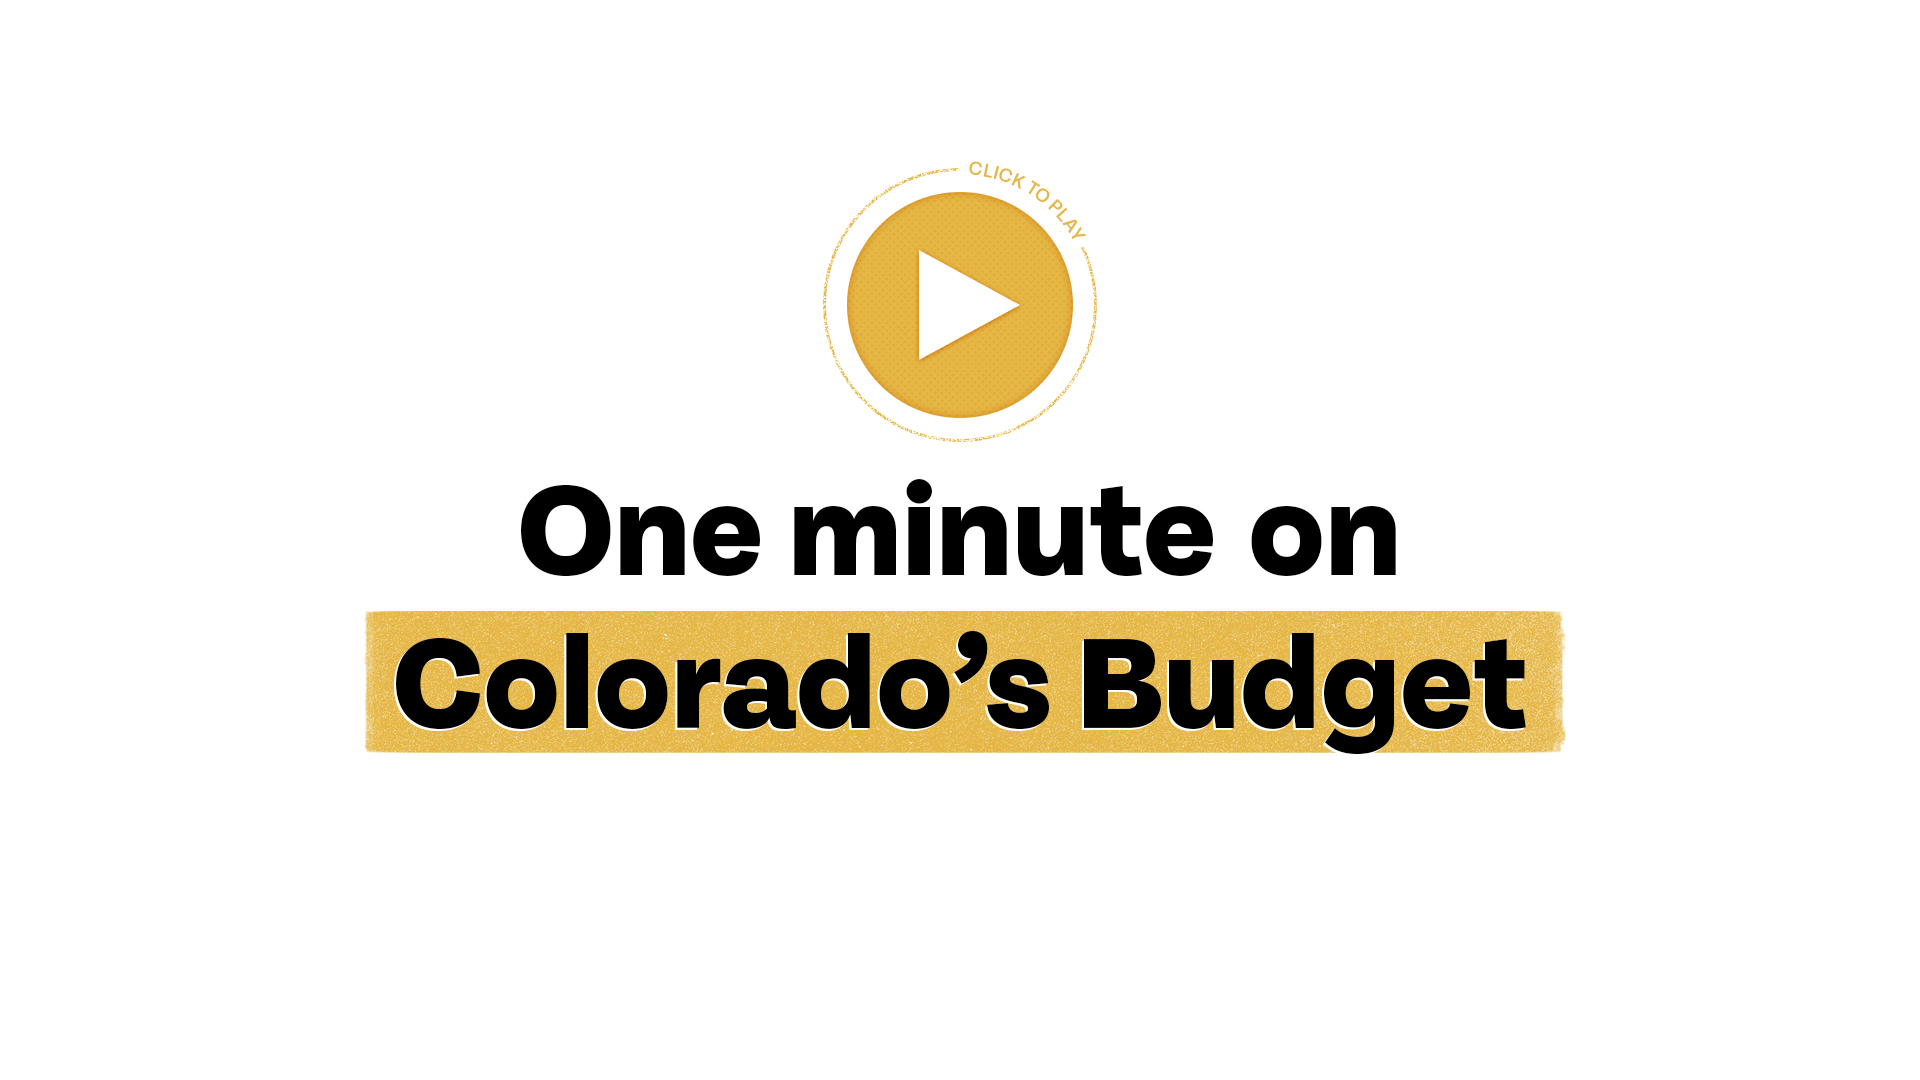 Graphic for a video segment titled "One Minute on Colorado's Budget" with a play button icon.